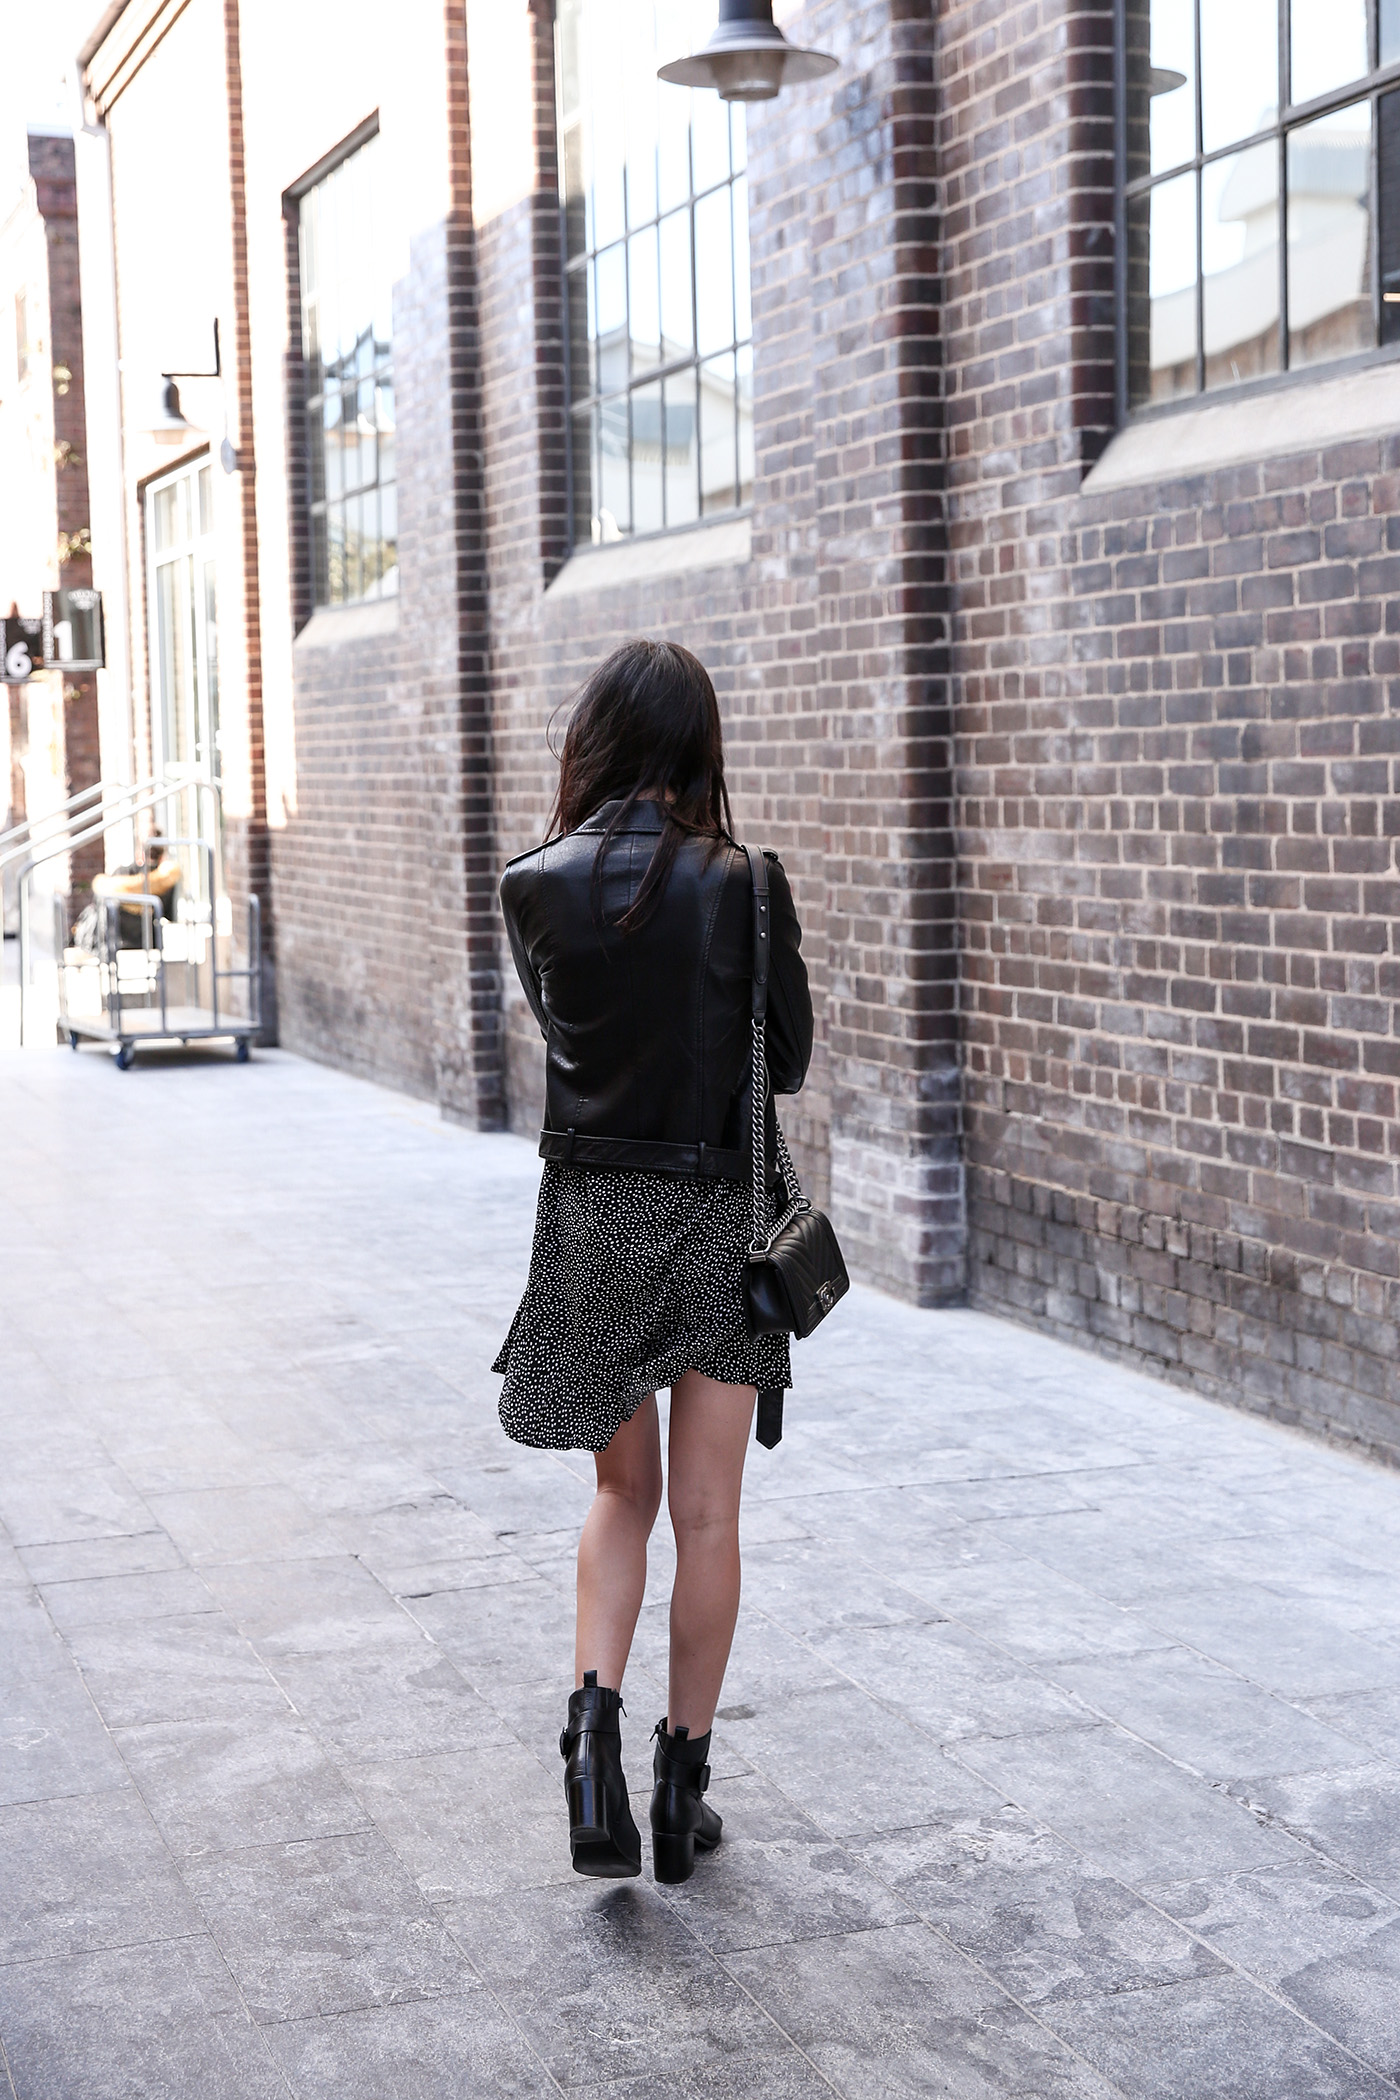 Minimal outfit wearing a polka dot dress and leather jacket